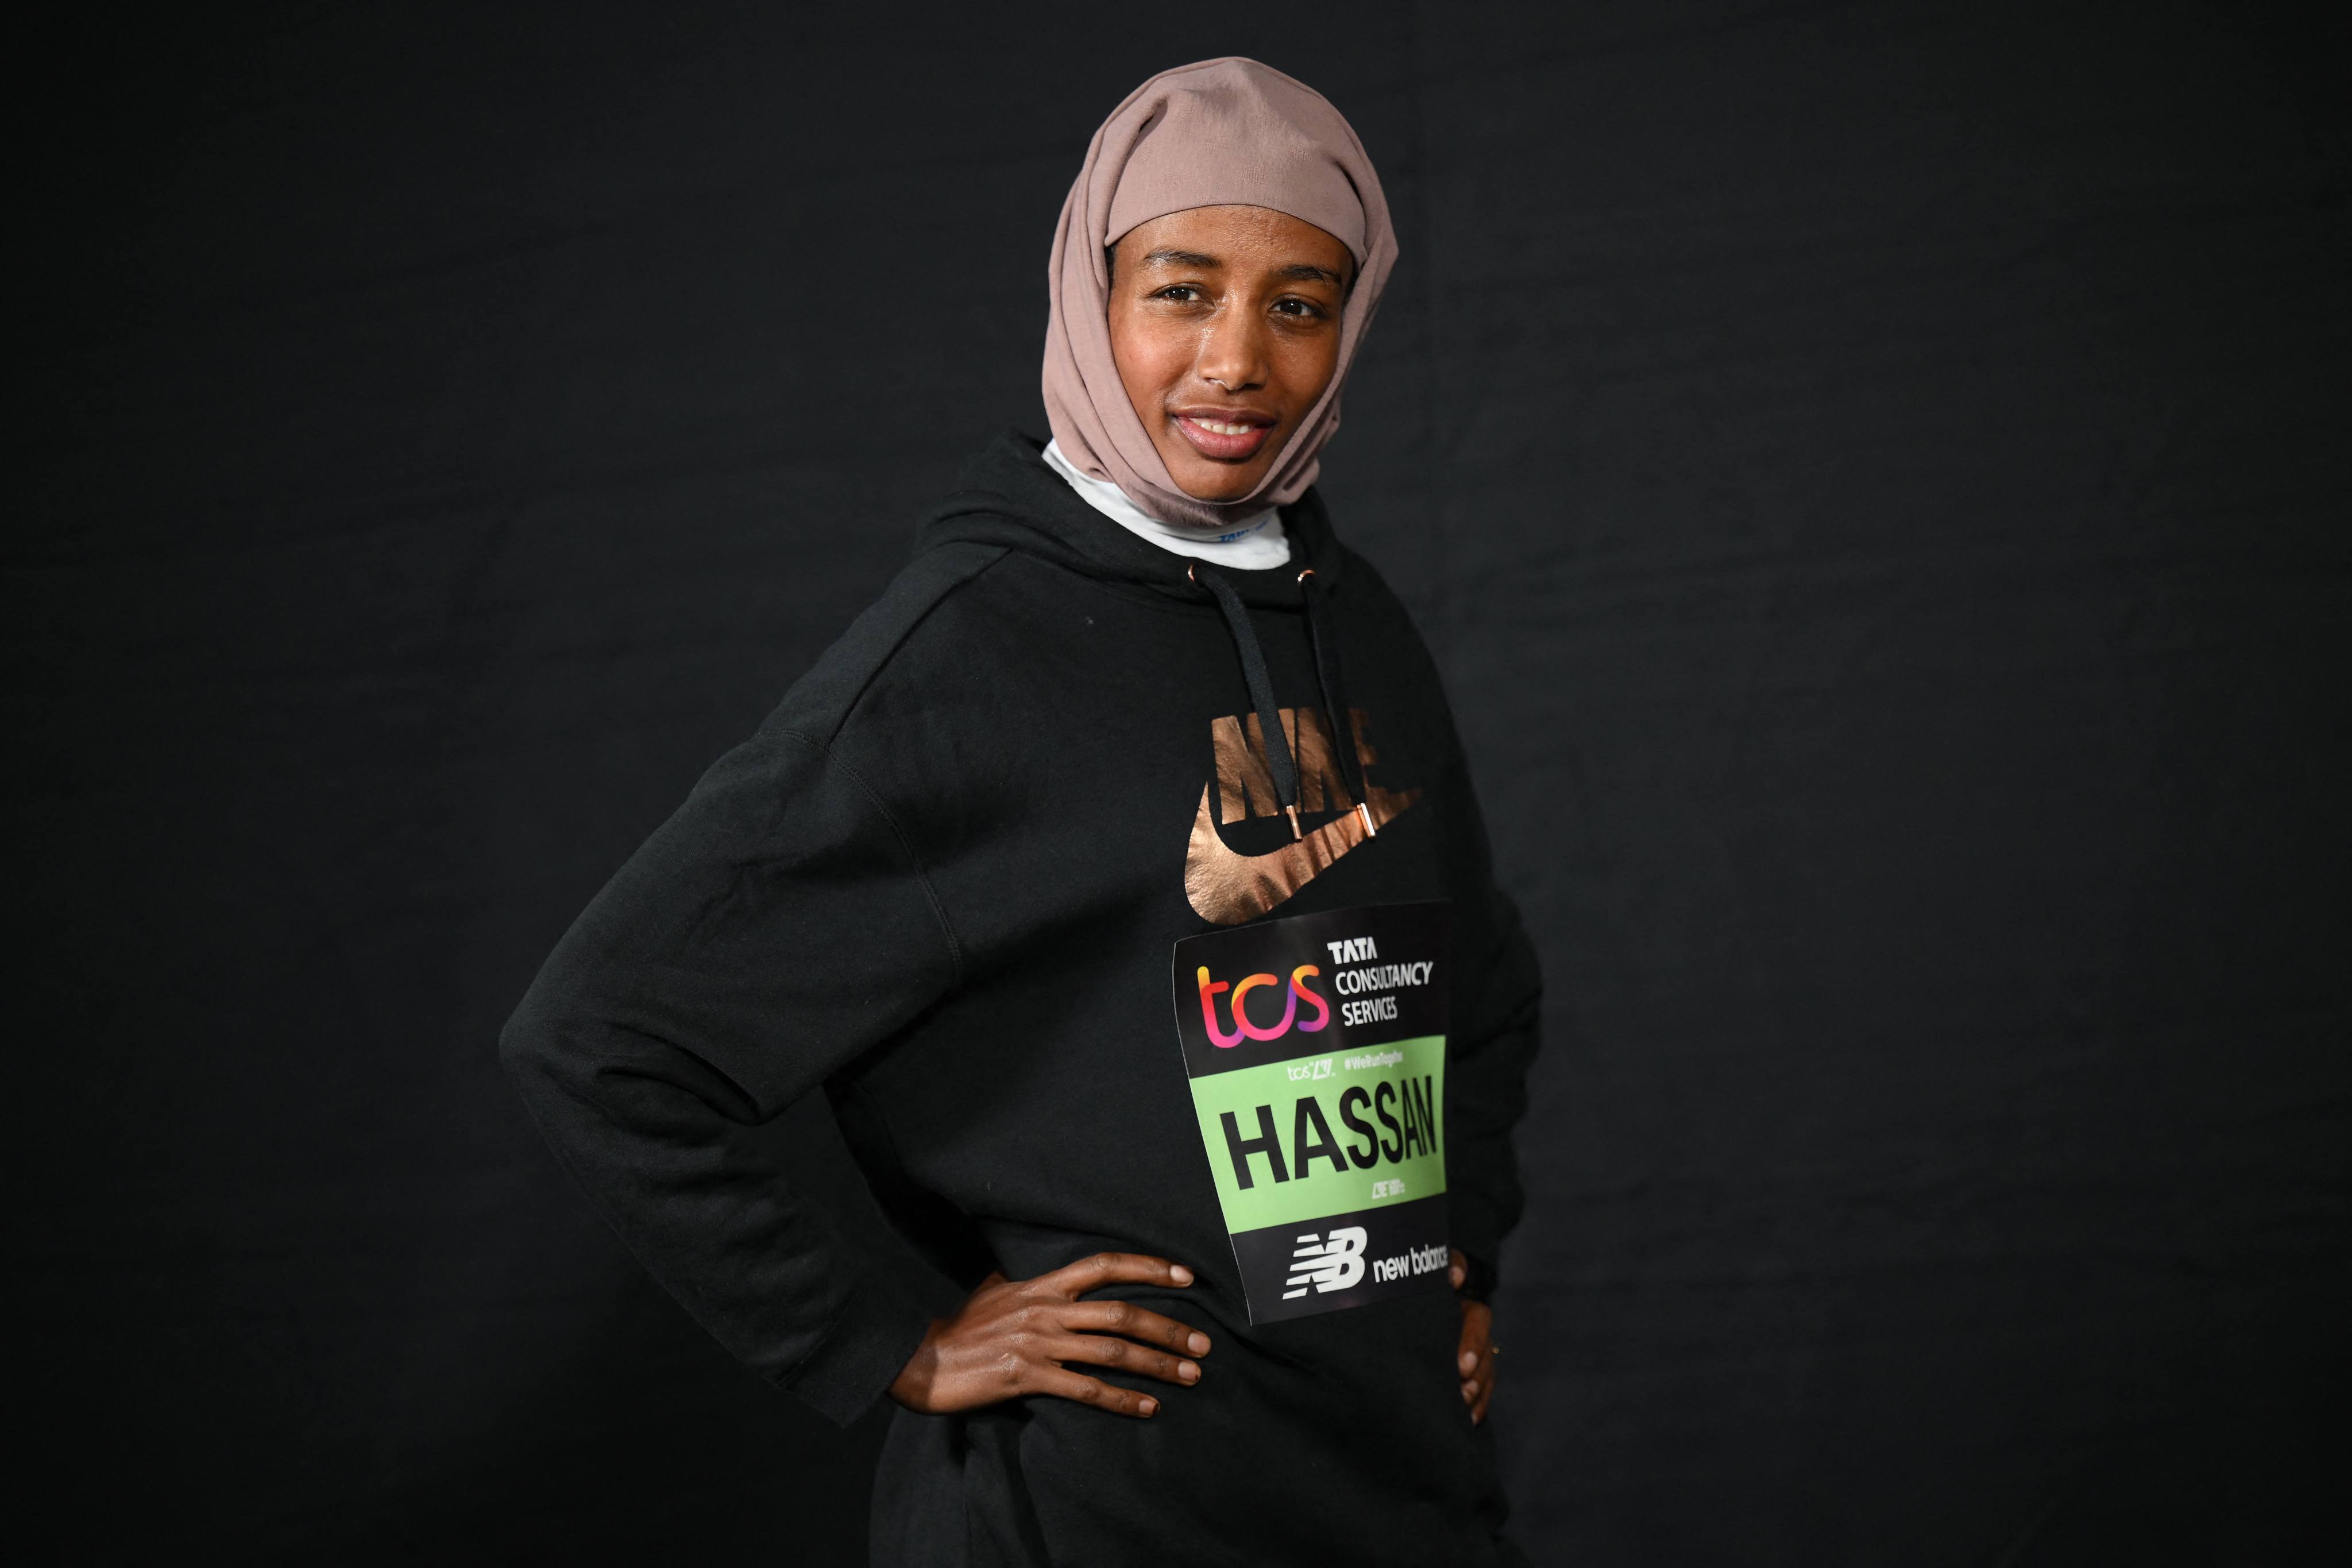 Netherlands’ Sifan Hassan poses during the international elite women’s photocall ahead of the London marathon. Photo: AFP